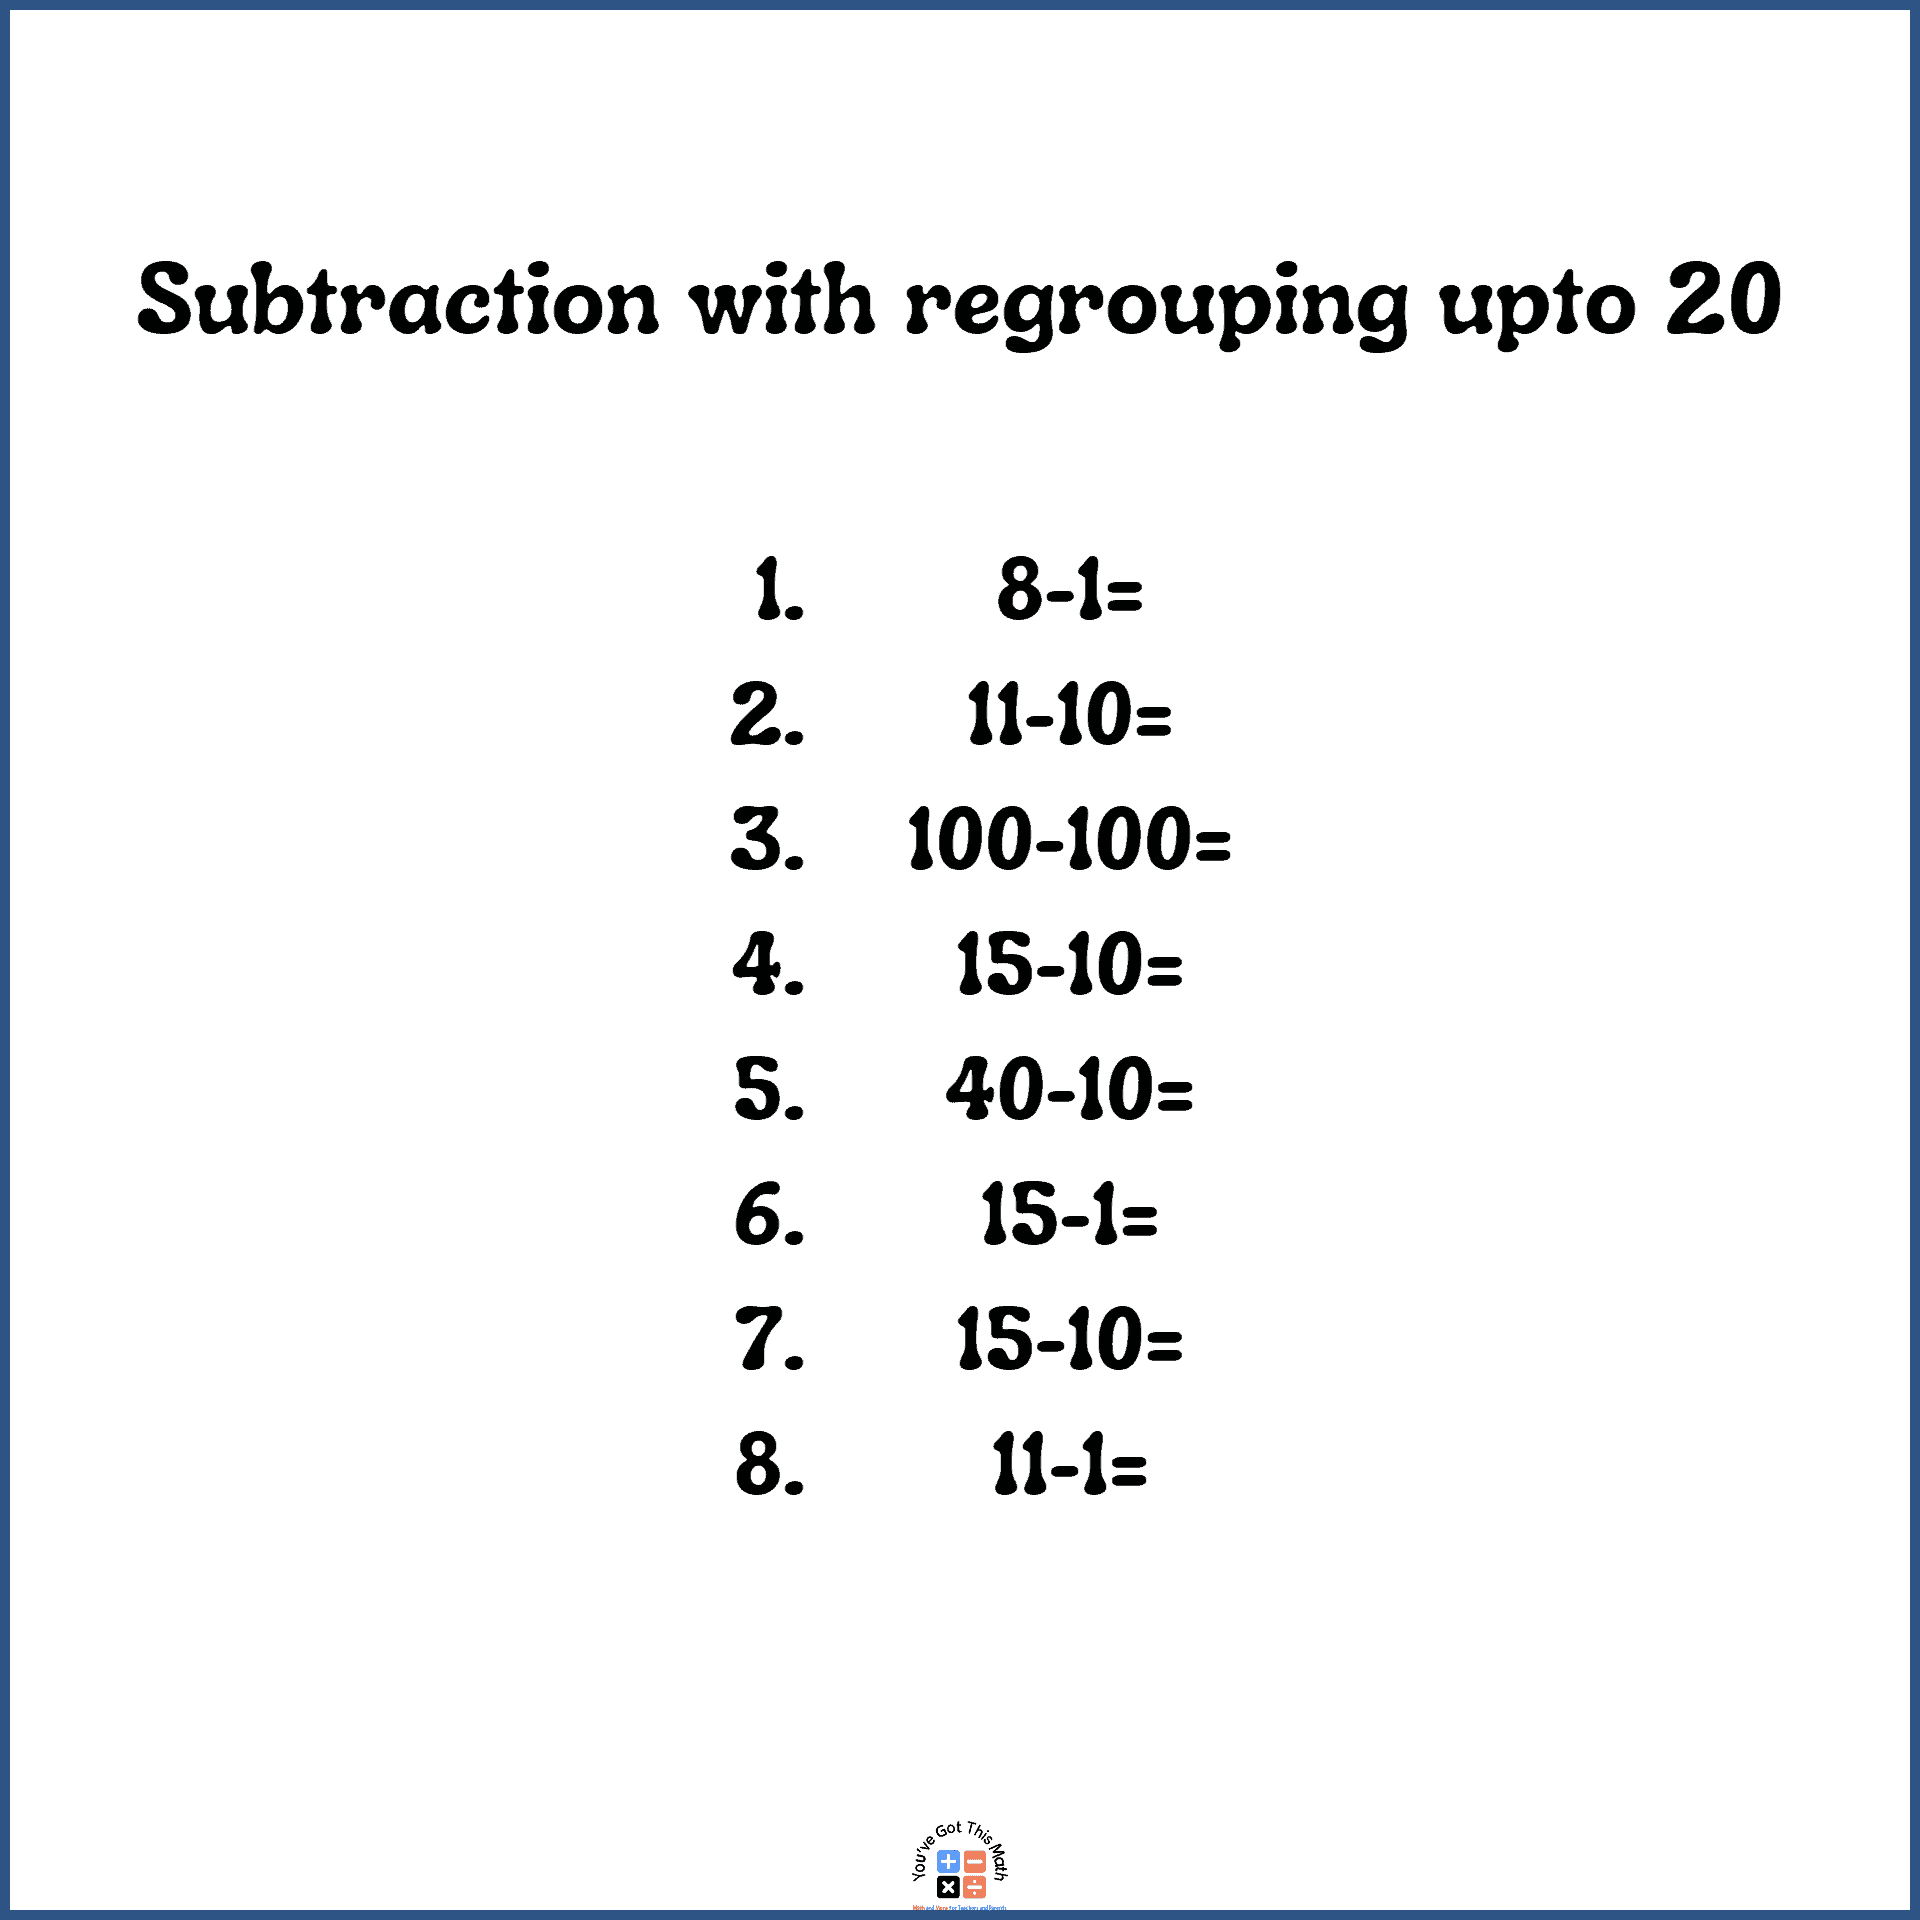 Subtraction of 1, 10, and 100 to subtract 2 digit numbers with regrouping